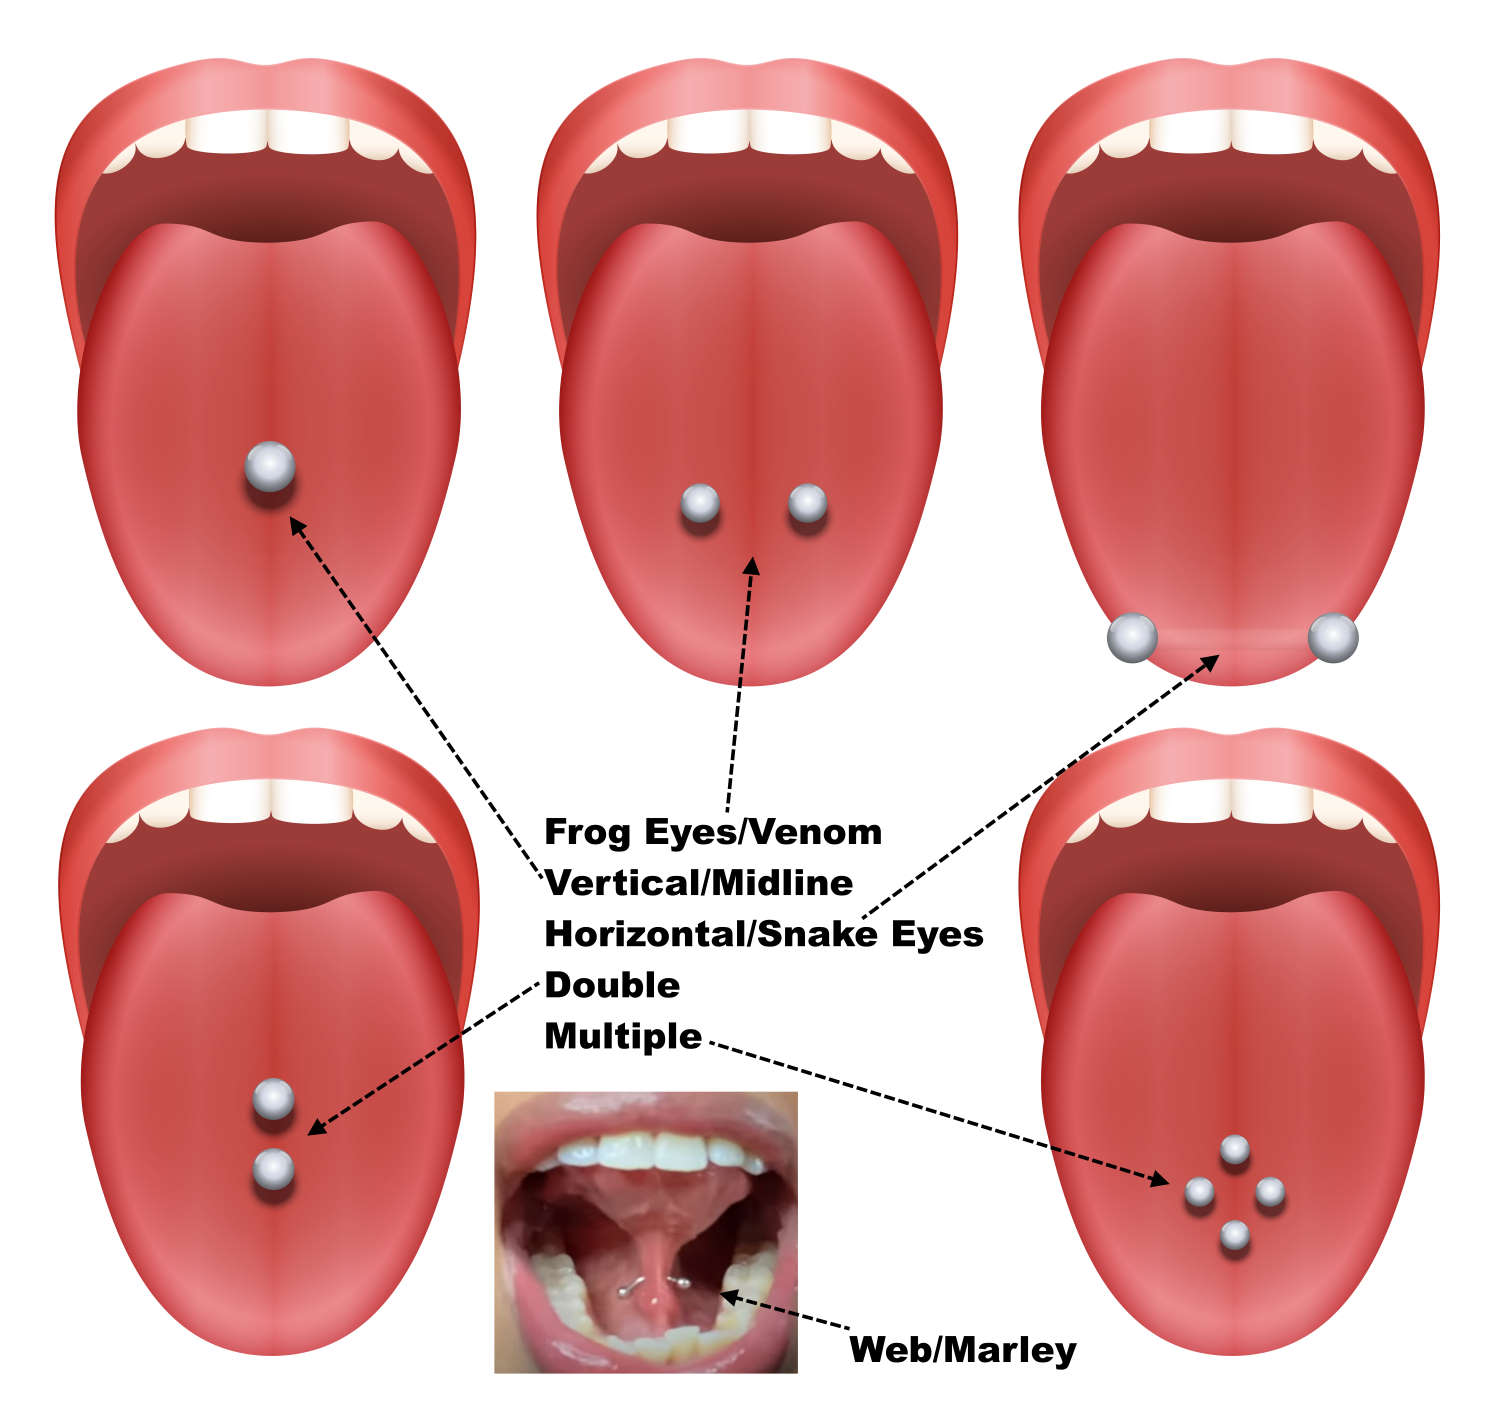 Six tongue piercing locations with illustrations of five of the piercings and a photo of a web piercing.